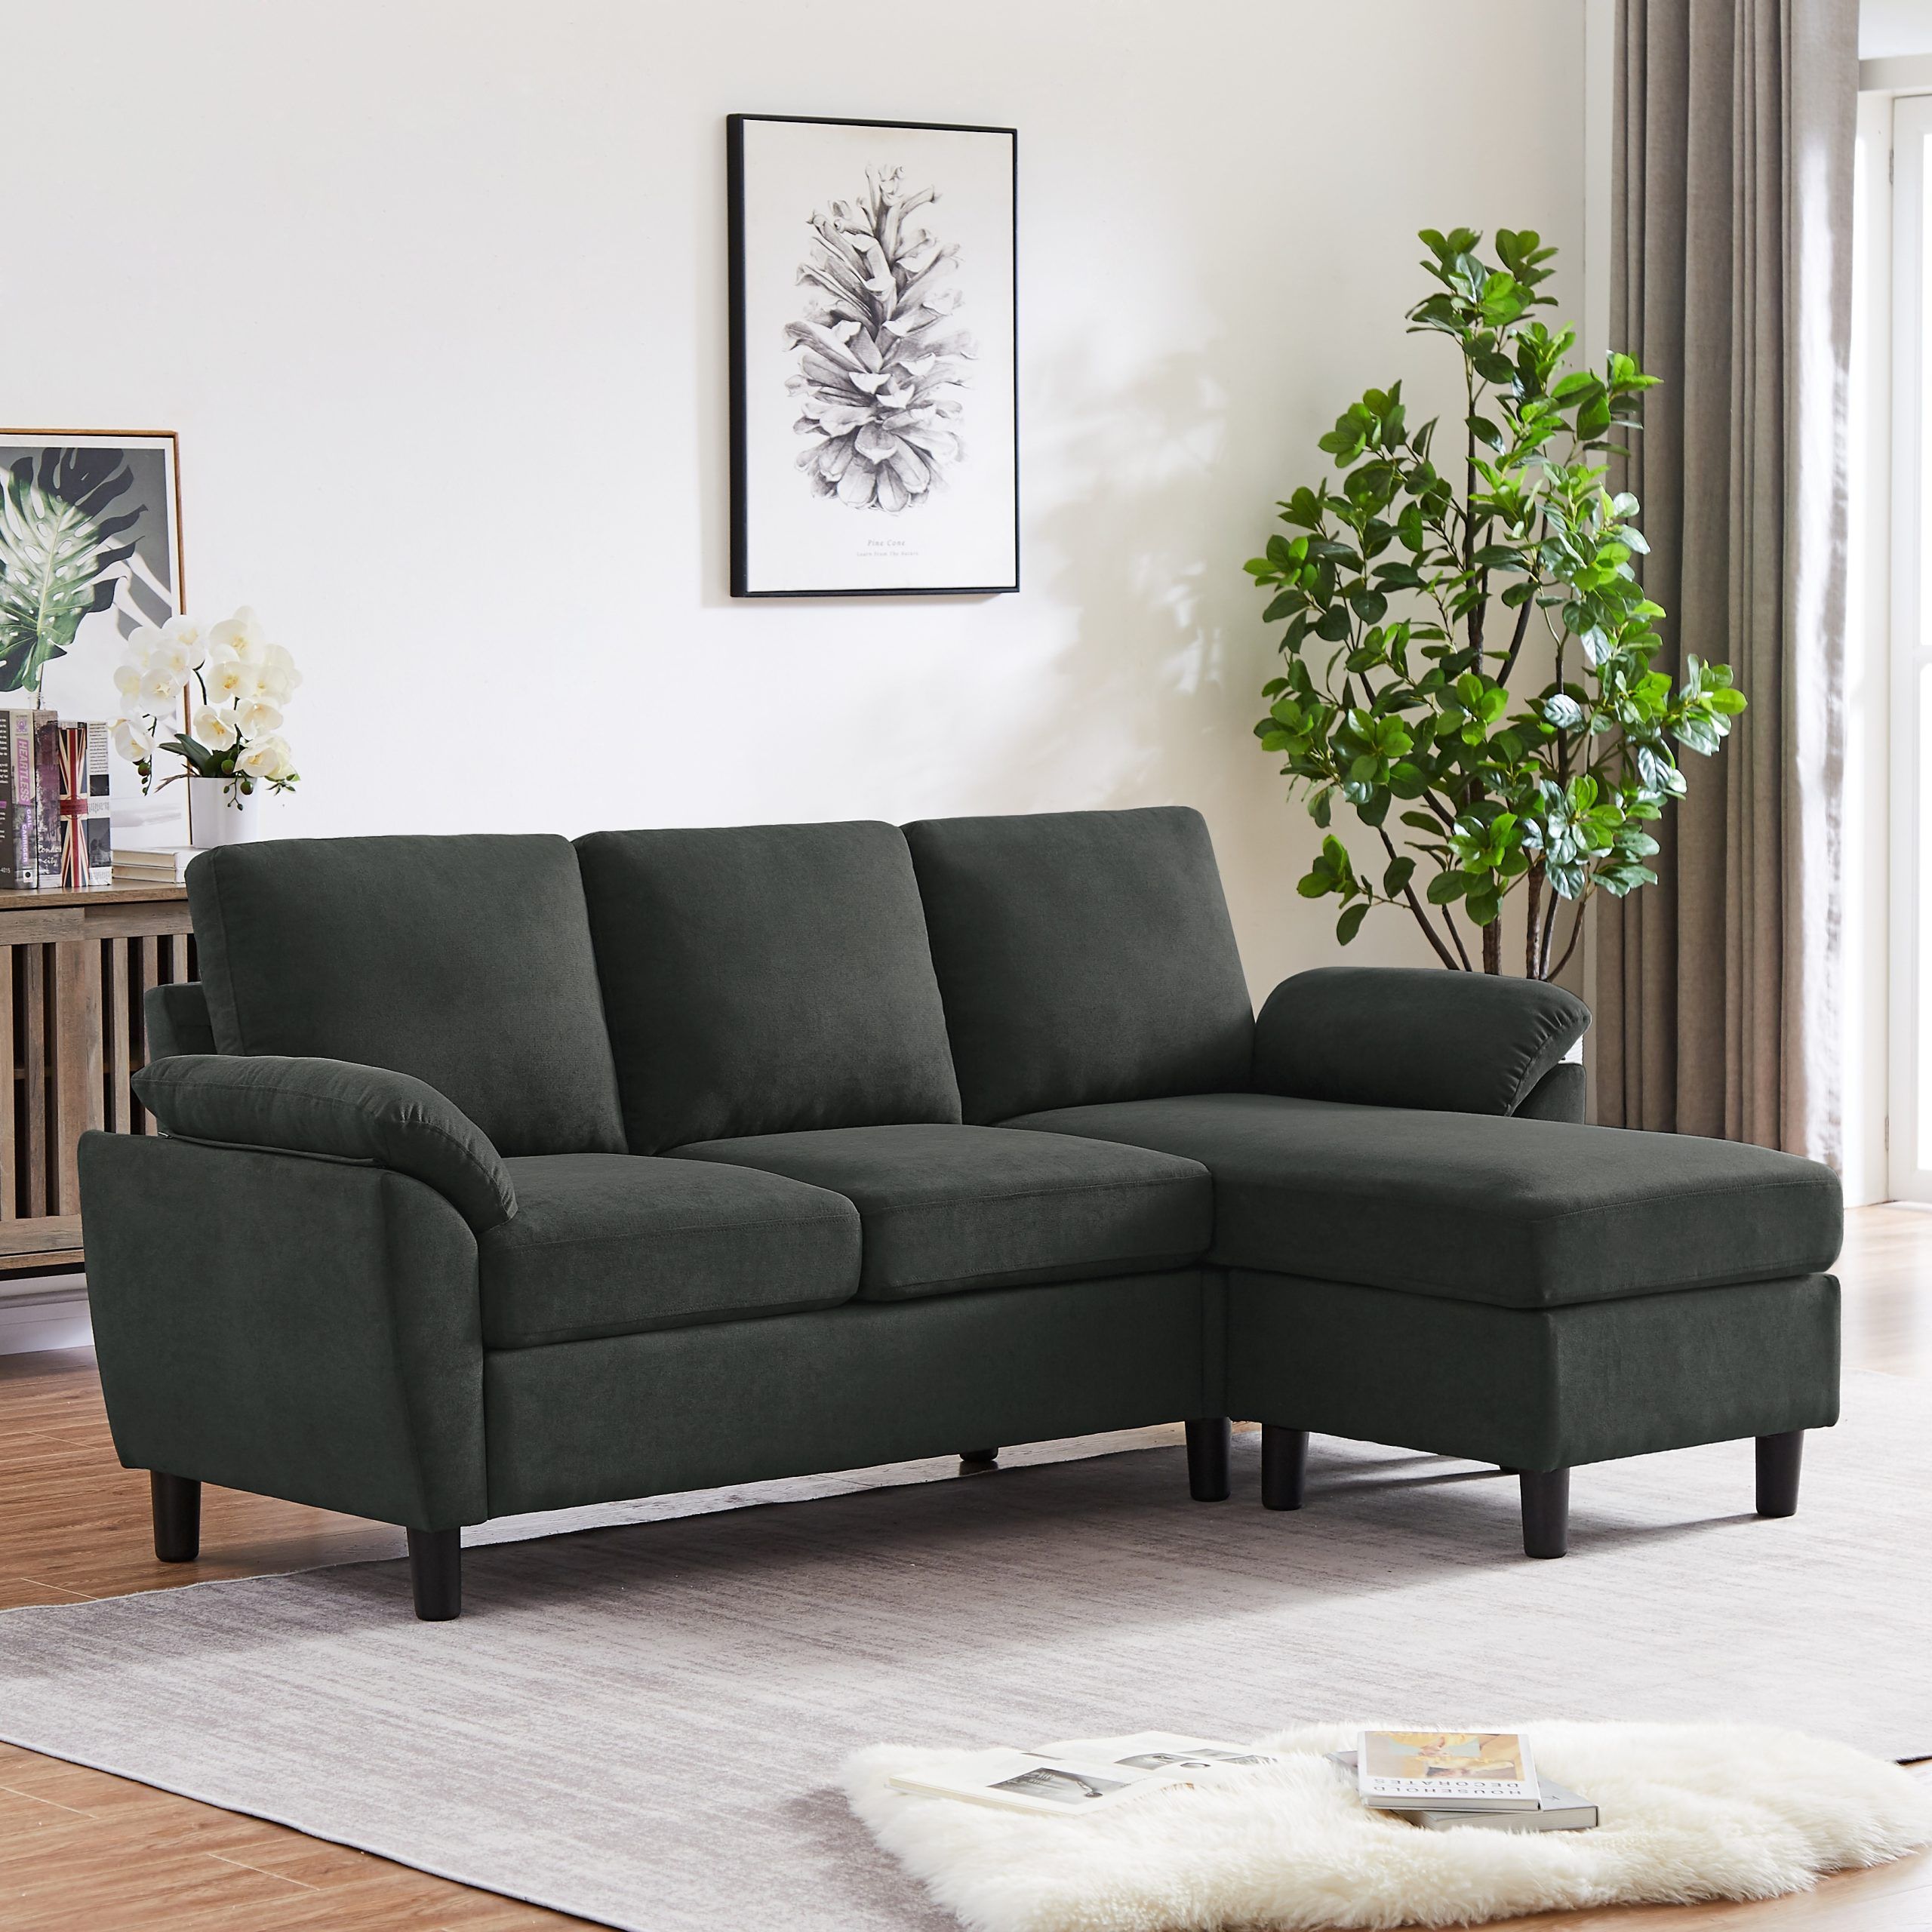 Modern Sectional Sofa Couch L Shaped With Removable Armrest, Convertible  Couch With Reversible Ottoman For Living Room – Bed Bath & Beyond – 36983057 Regarding Small L Shaped Sectional Sofas In Beige (View 5 of 15)